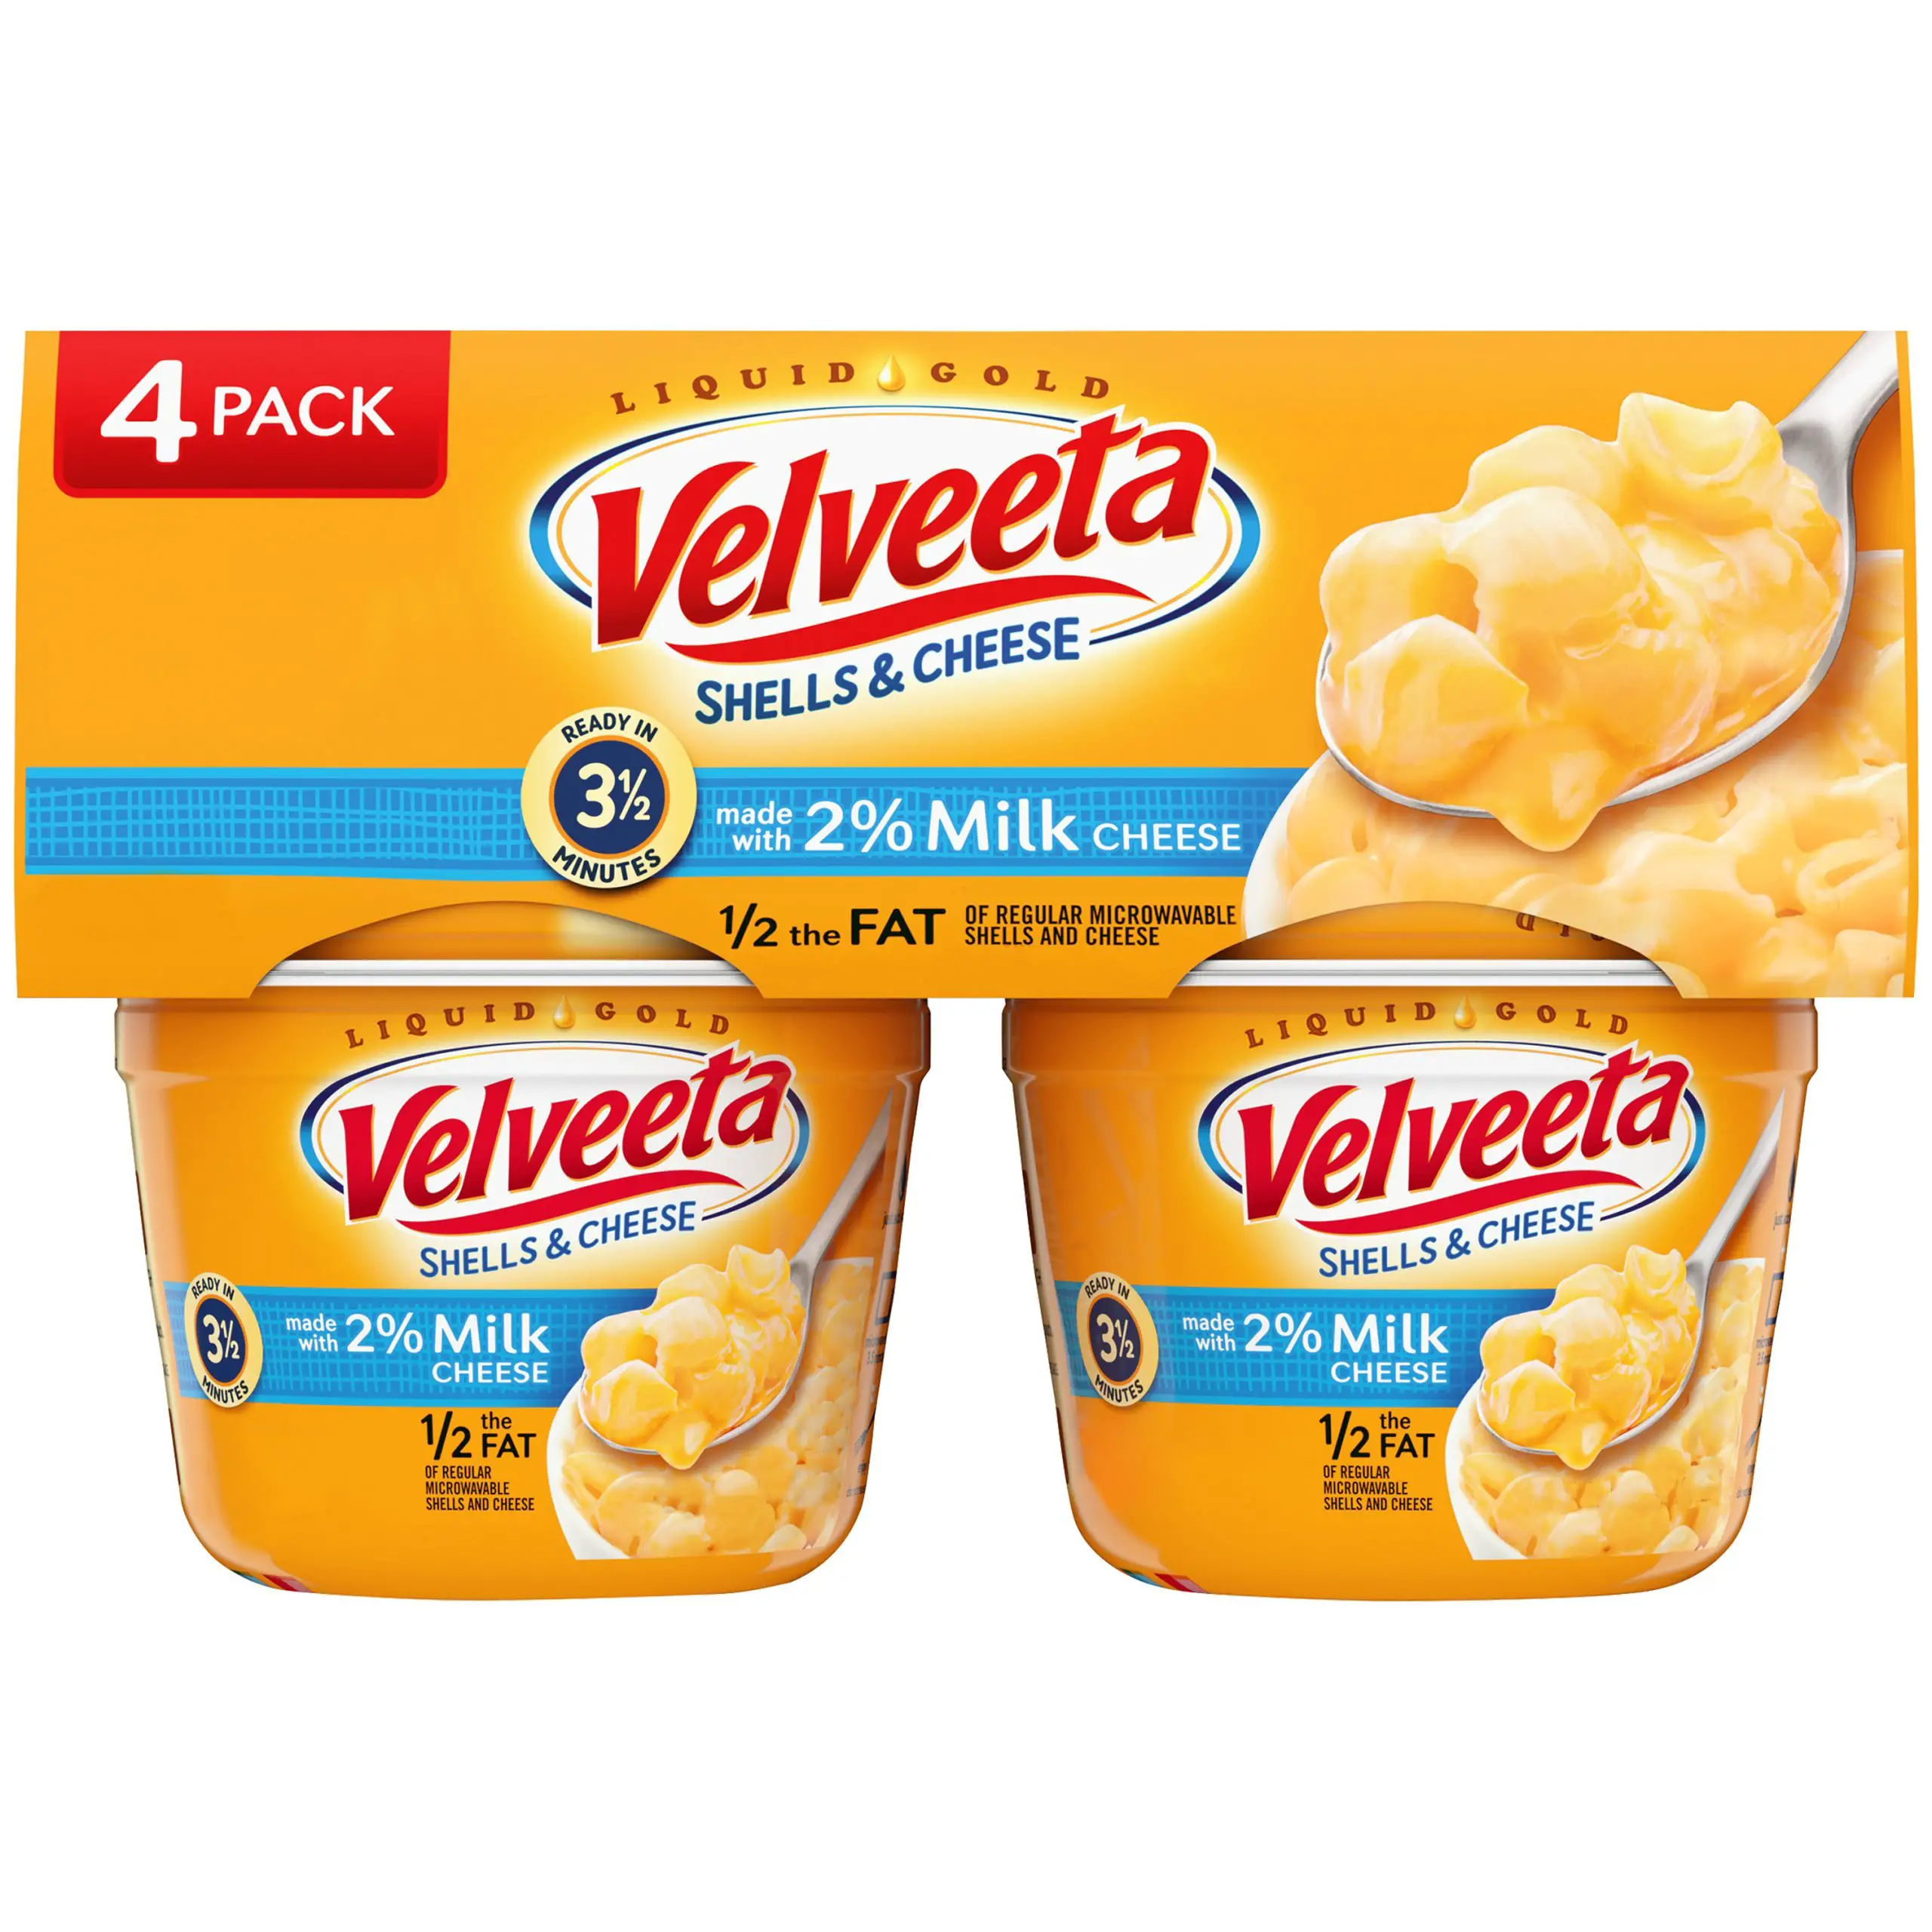 VELVEETA Shells and Cheese Cups Made with 2% Milk Cheese ...